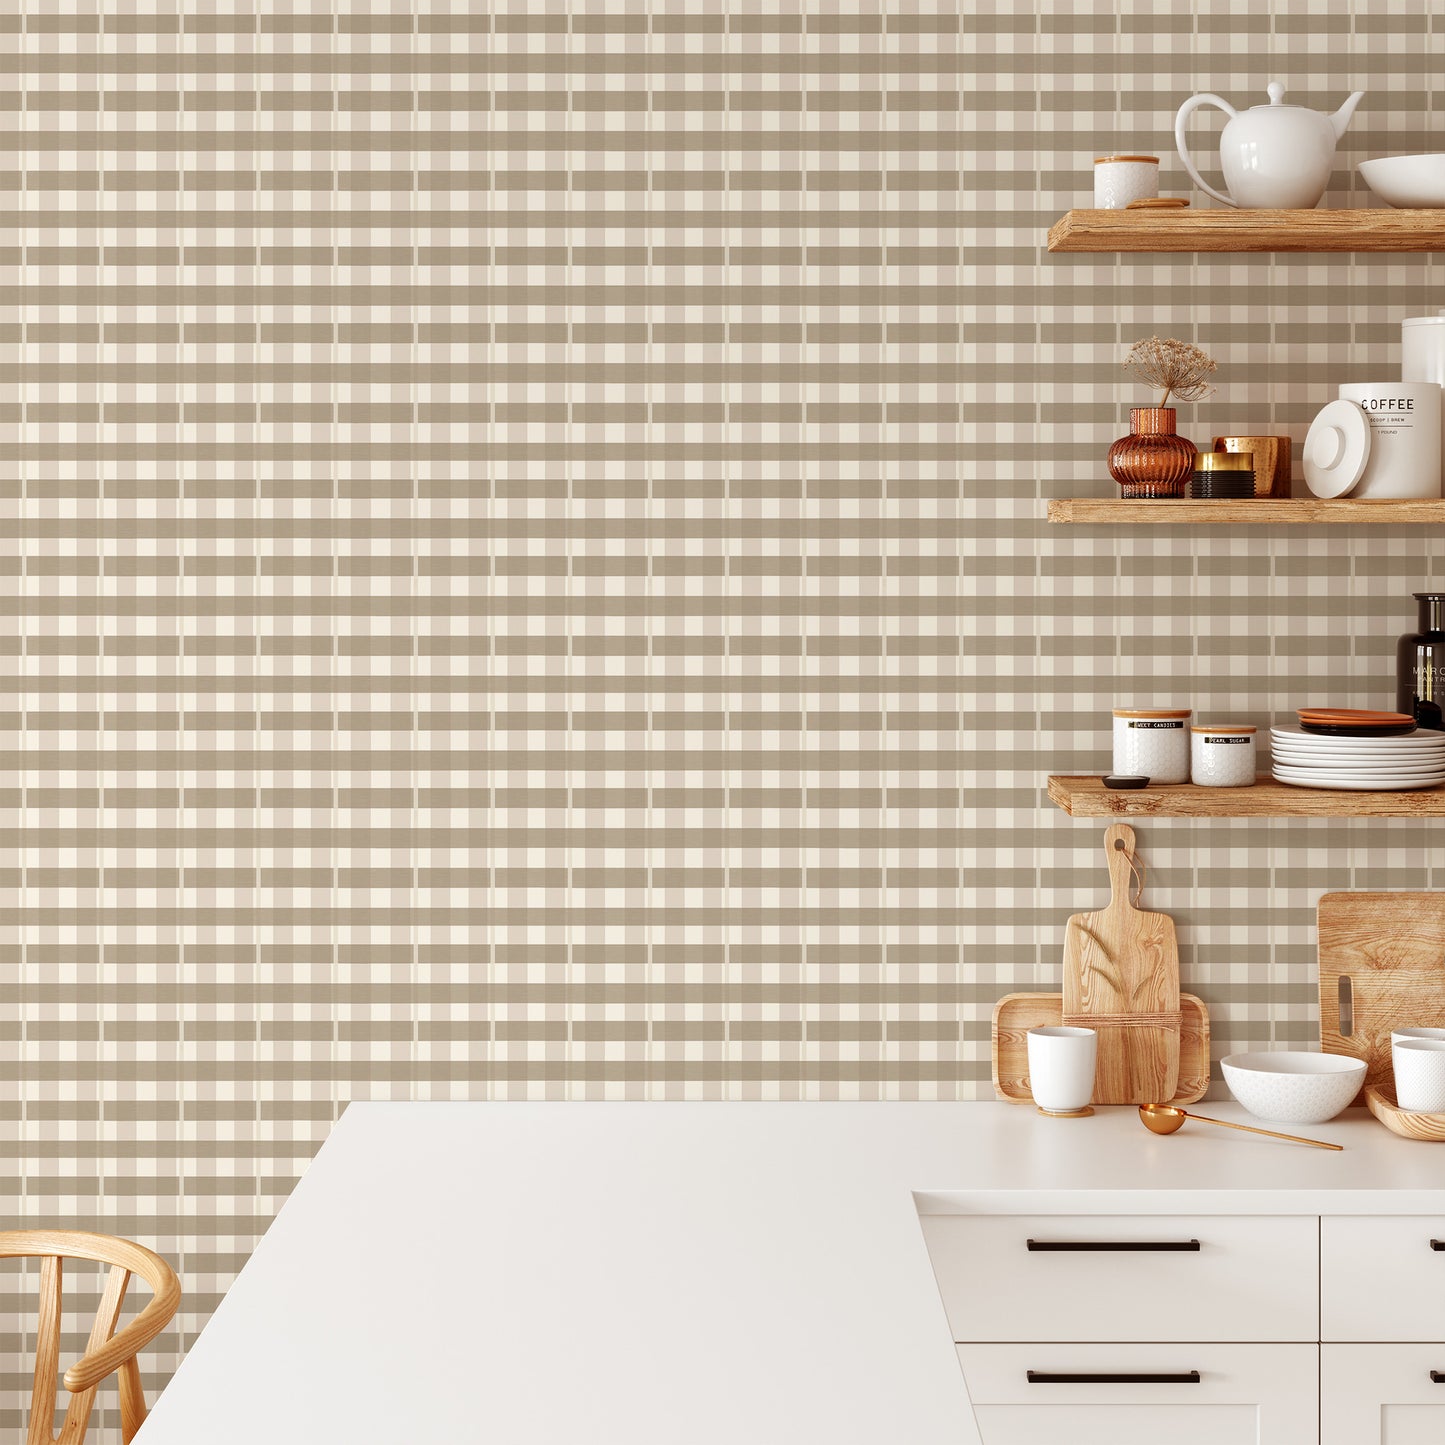 Featuring soft, cloudy sand tones and intricate plaid stripes, this hand-drawn wallpaper shown in a full size image.